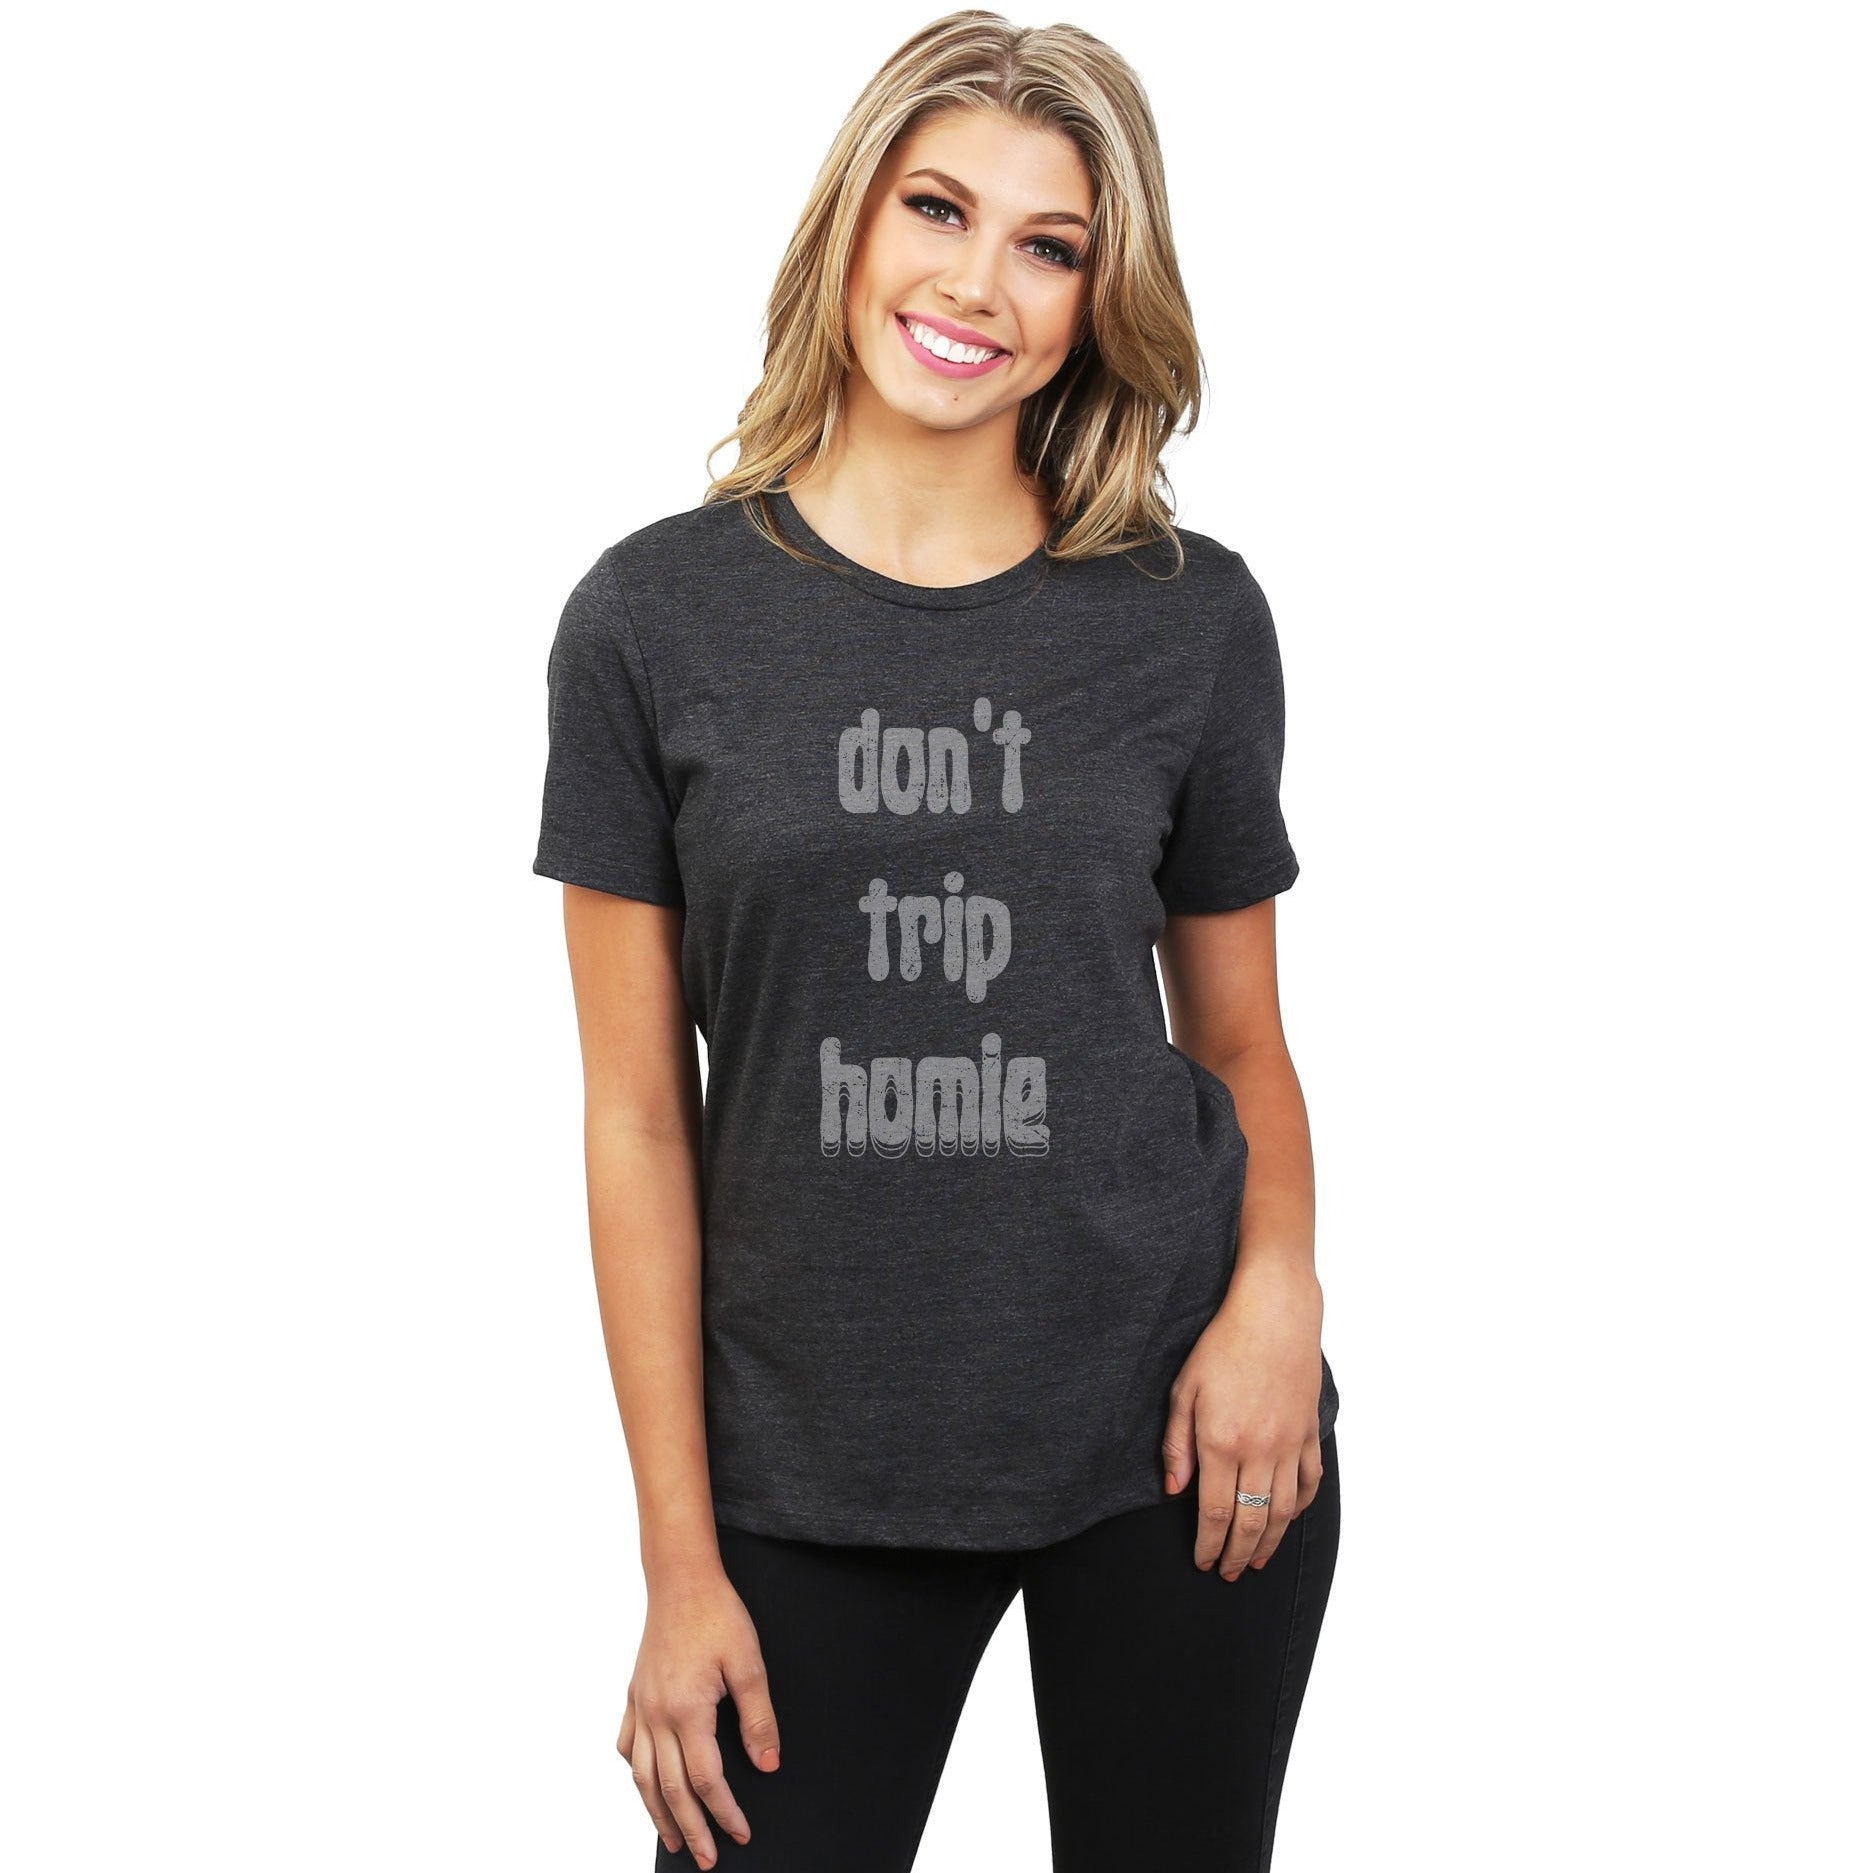 Don't Trip Homie Women's Relaxed Crewneck T-Shirt Top Tee Charcoal Model
